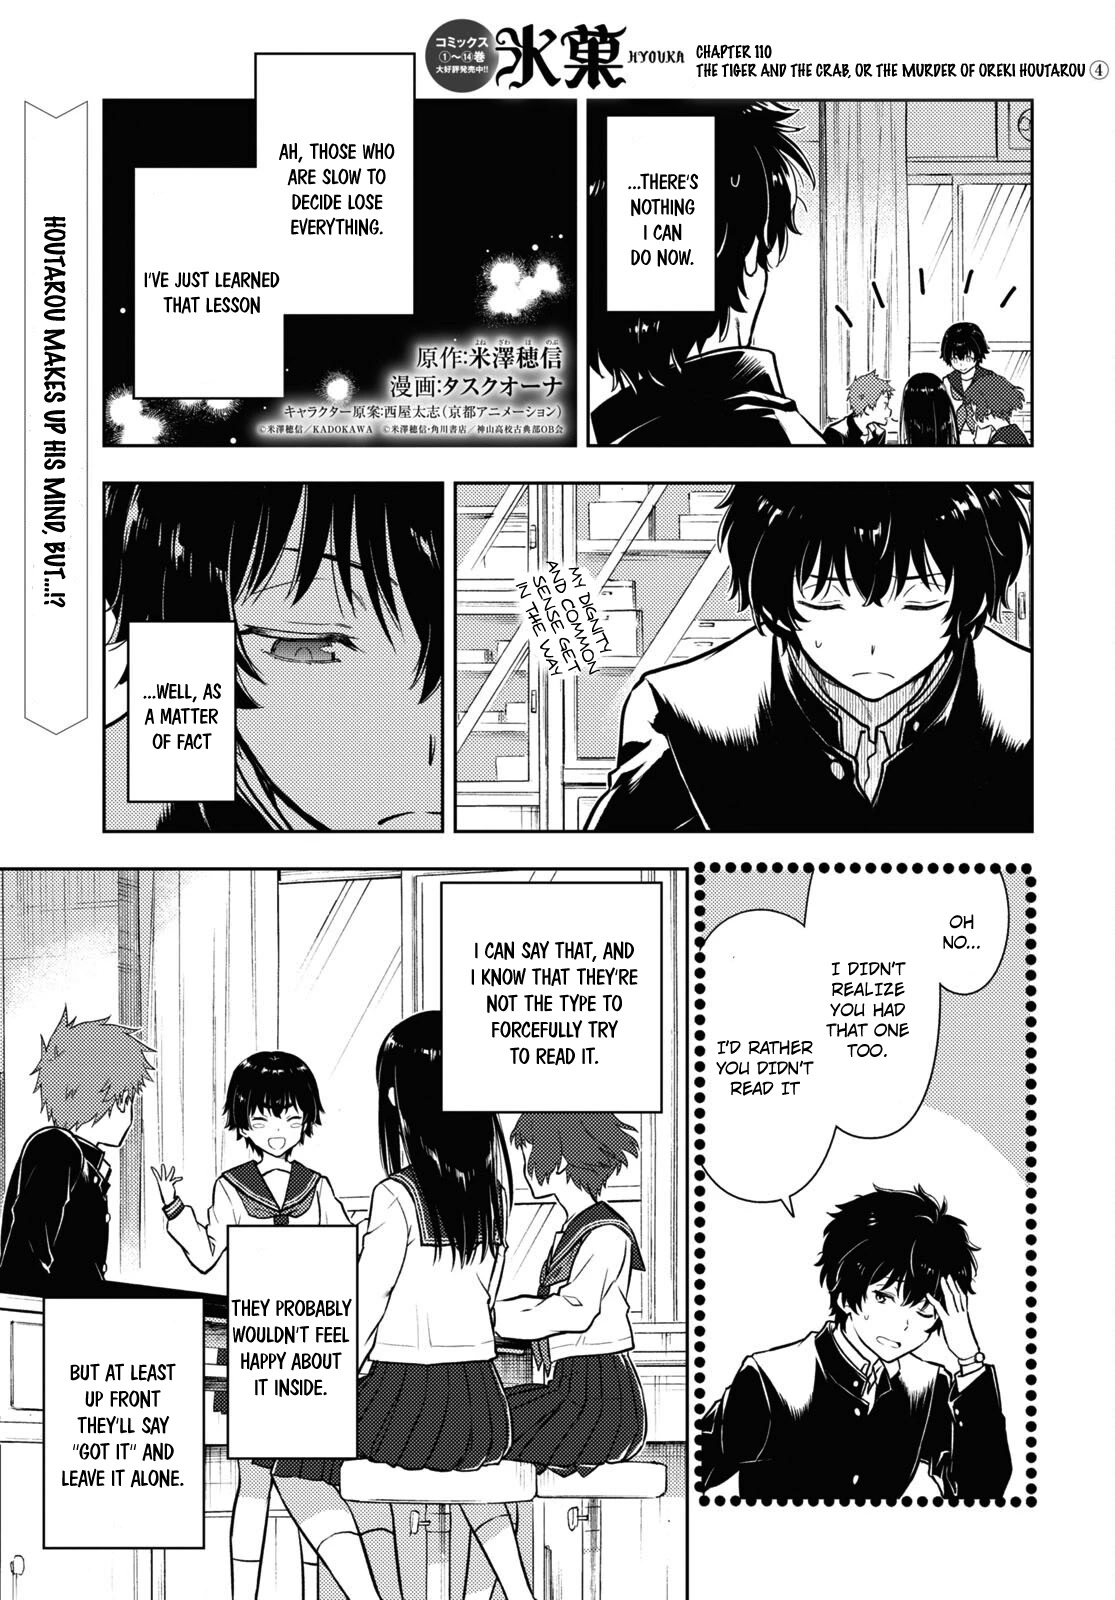 Hyouka Chapter 111: The Tiger And The Crab, Or The Murder Of Oreki Houtarou ④ - Picture 1